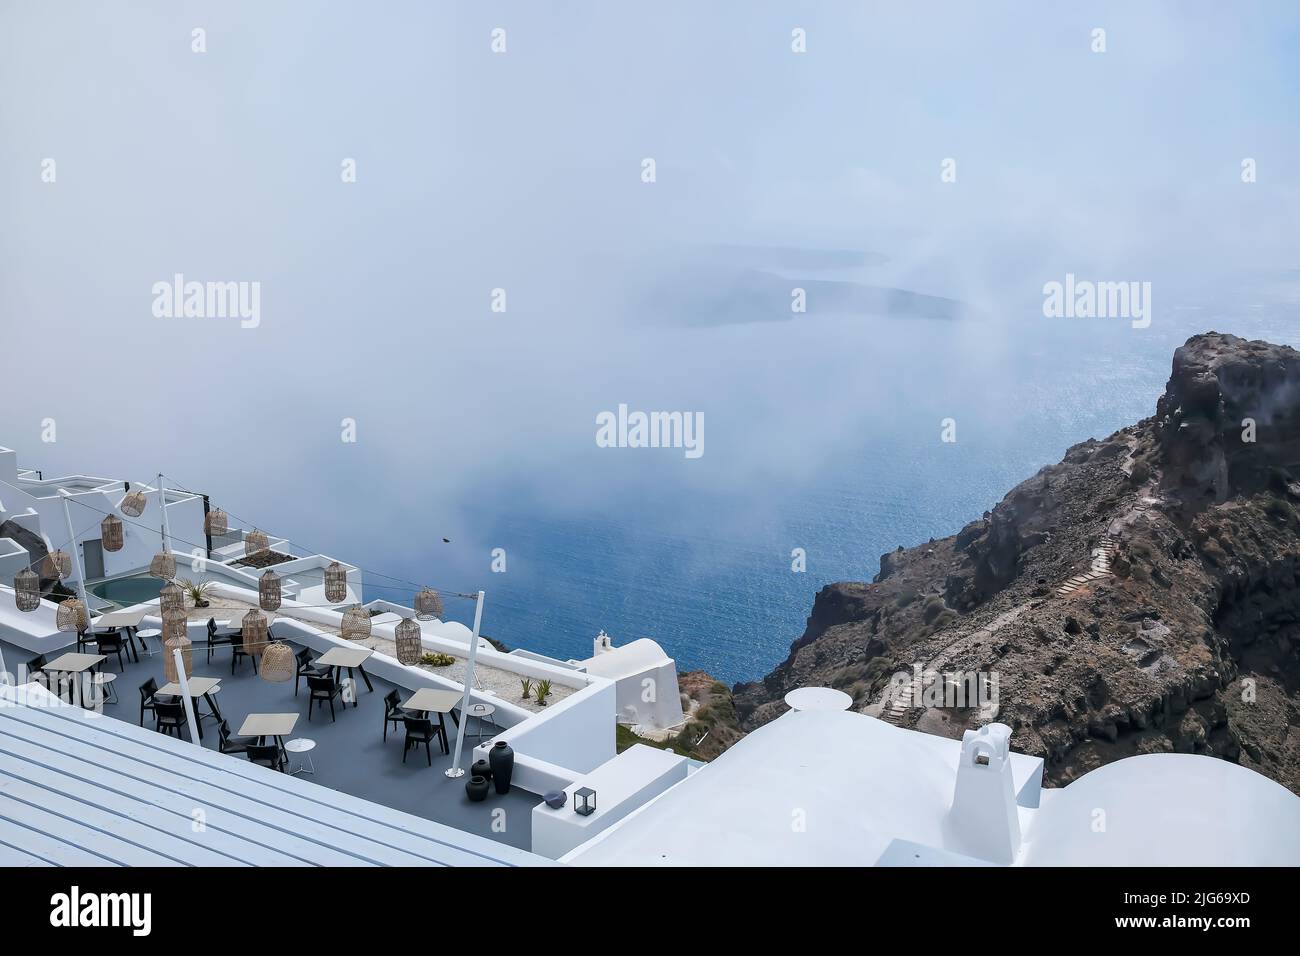 Santorini, Greece - May 13, 2021 :  View of a picturesque terrace decorated with tables, chairs  and lights overlooking  the Aegean Sea on a cloudy day Stock Photo